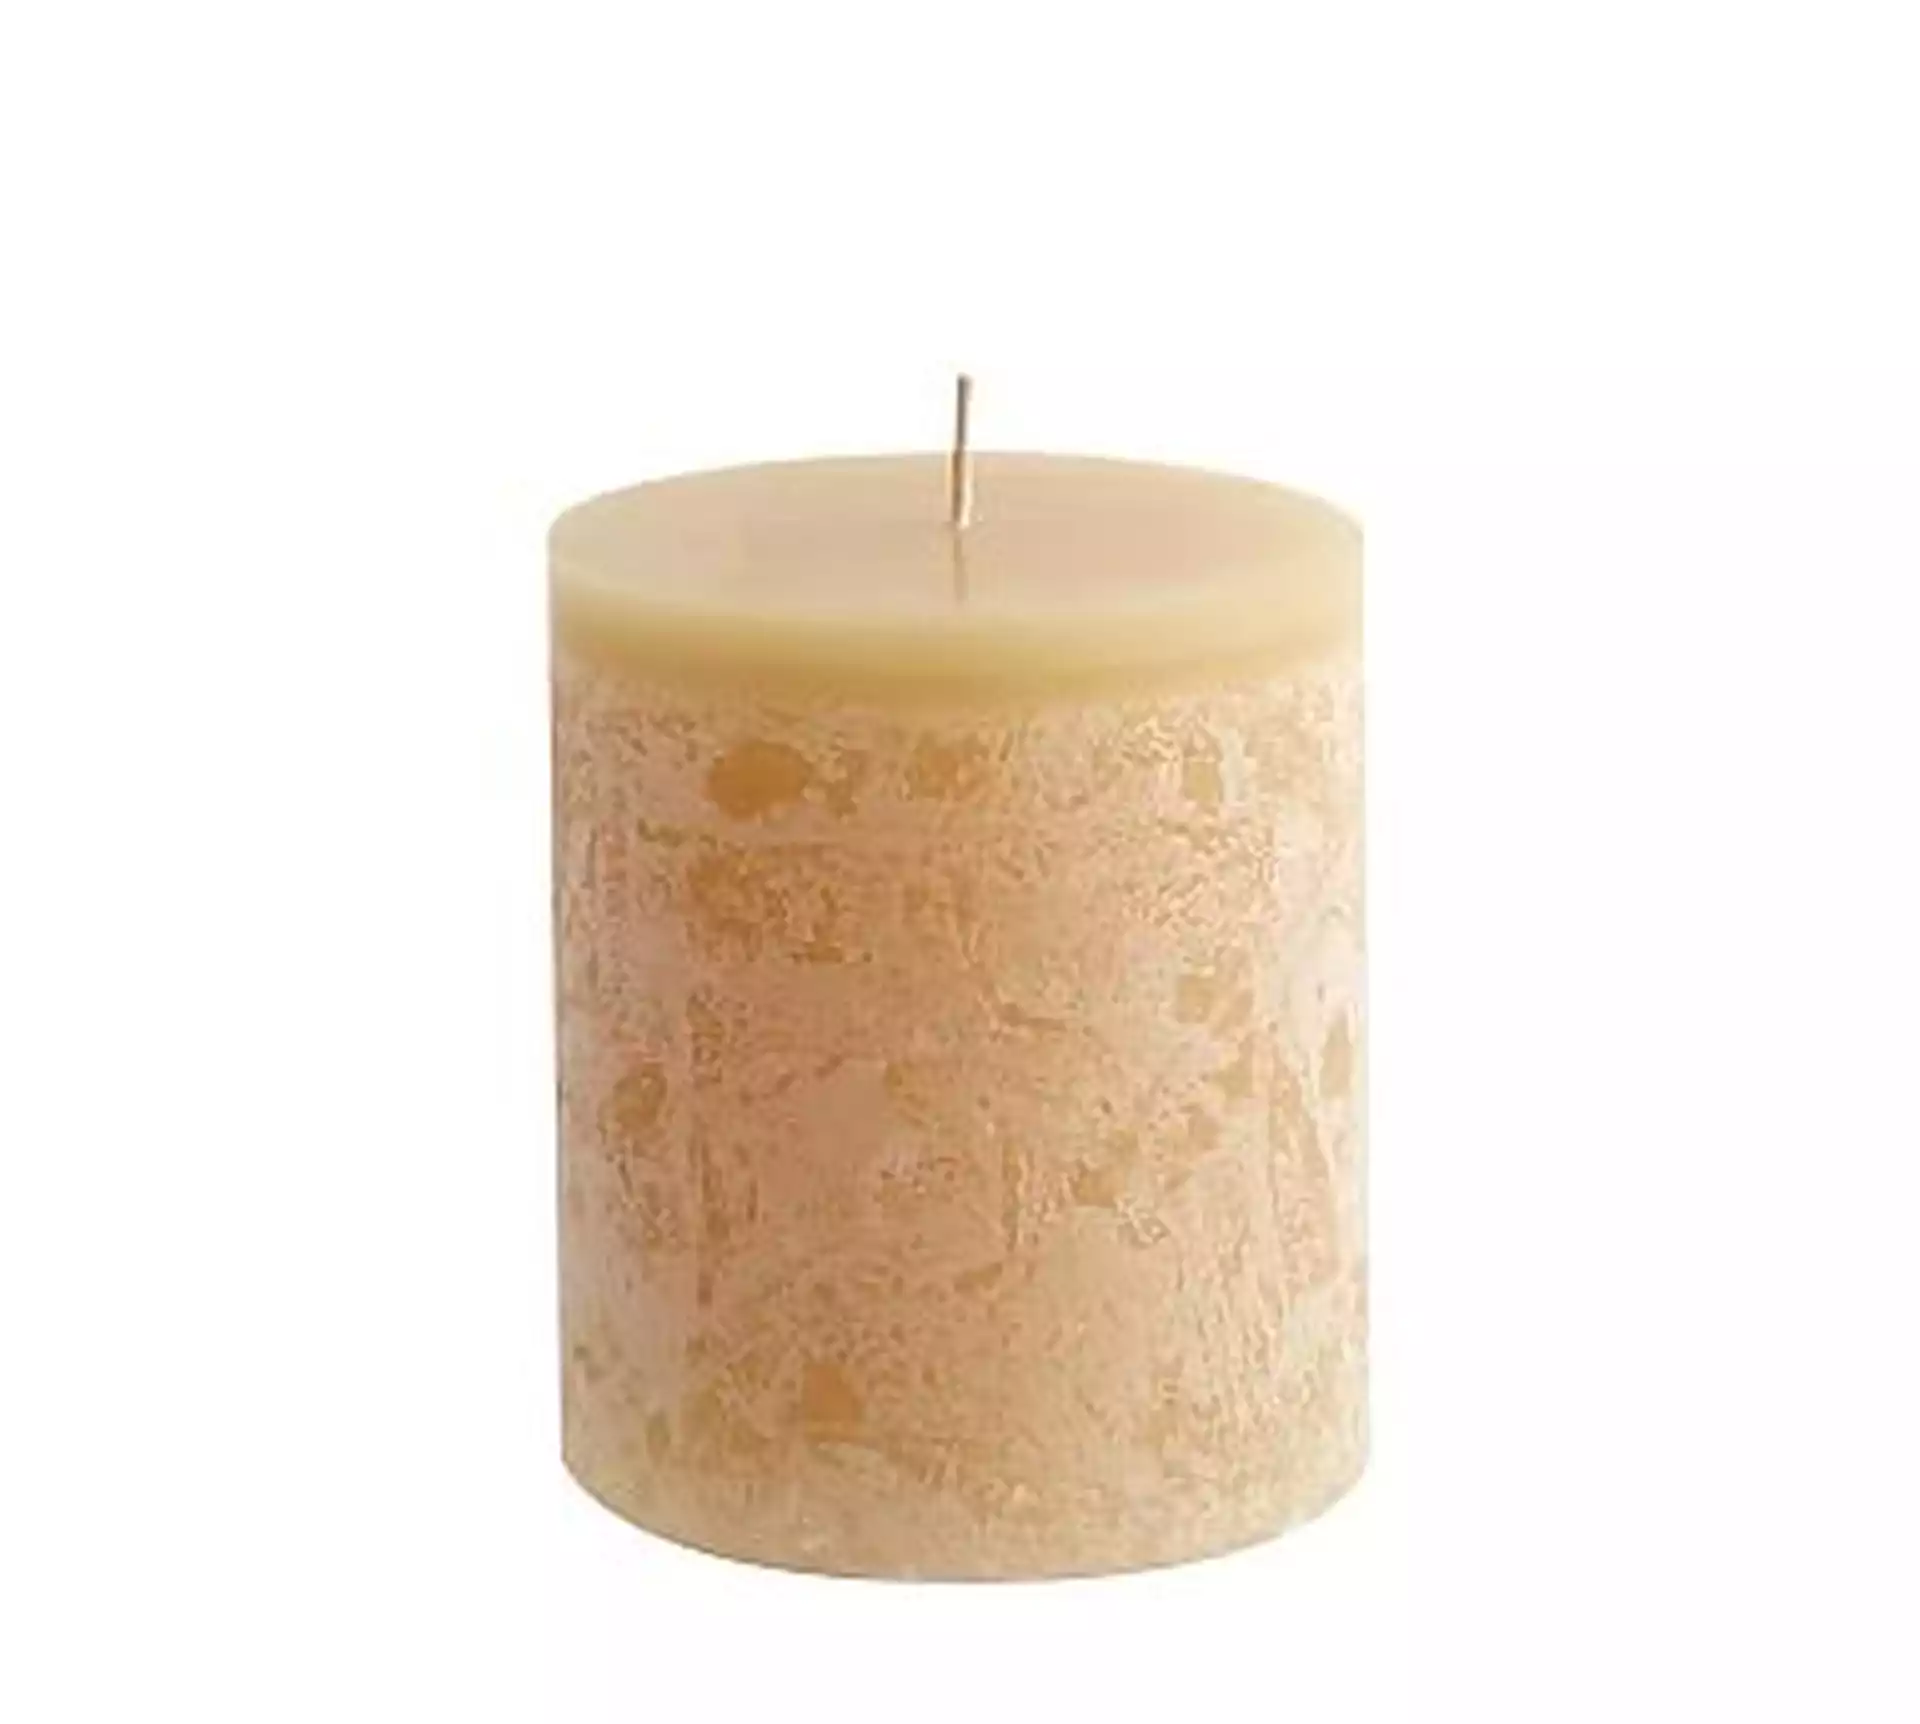 Scented Timber Pillar Candles, Ivory, Honeysuckle, 4" x 4.5"